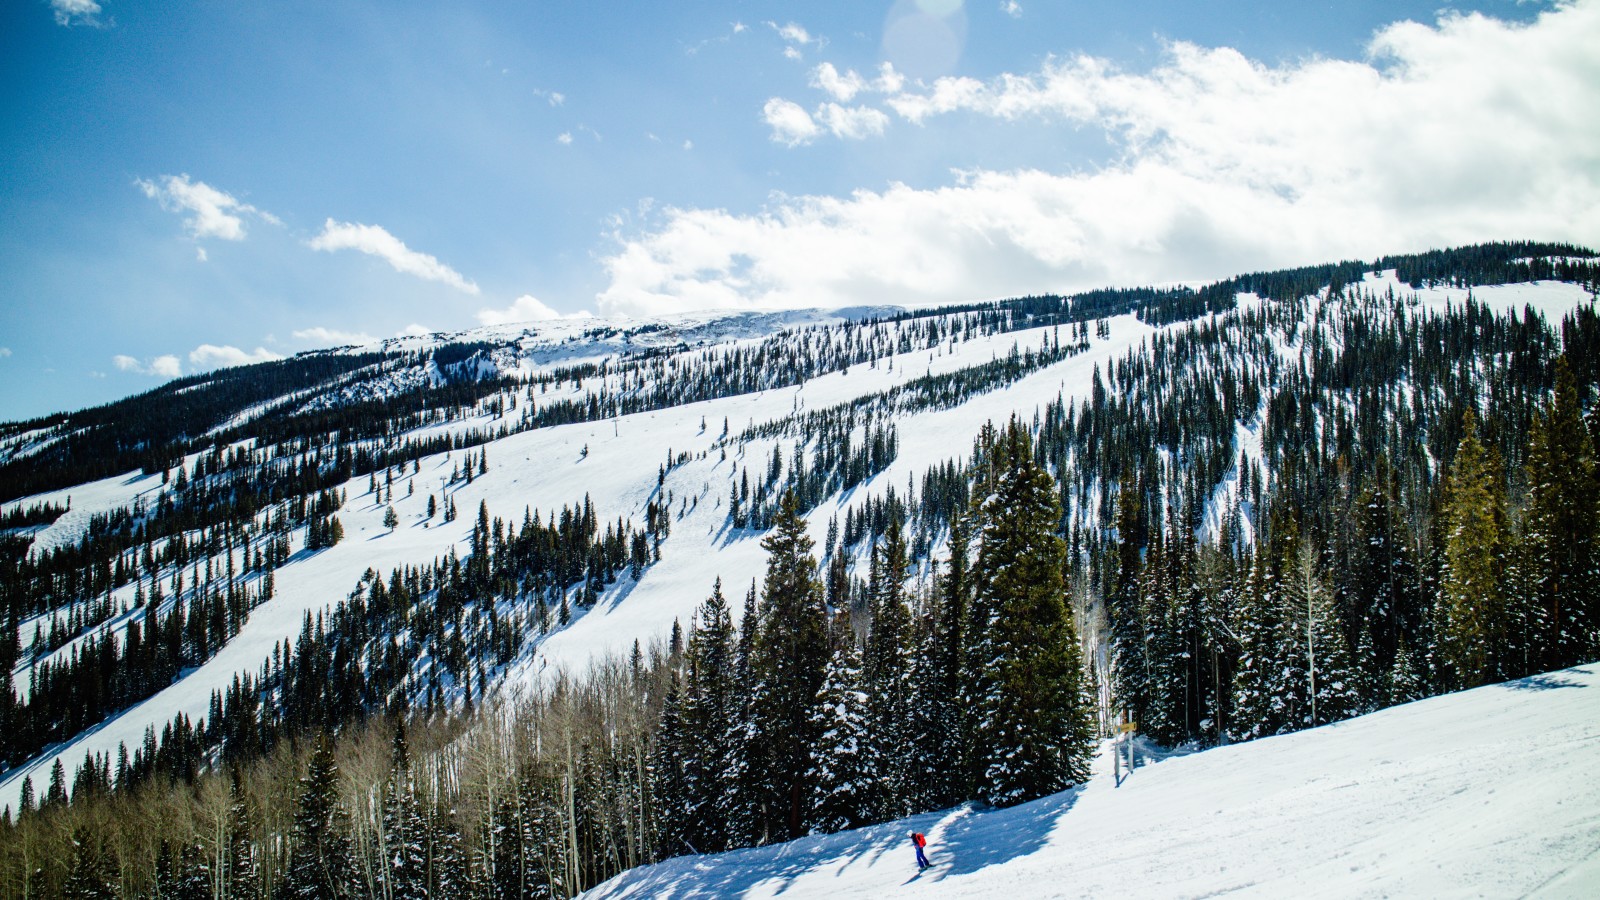 Snowy ski slopes with blue skies during daytime